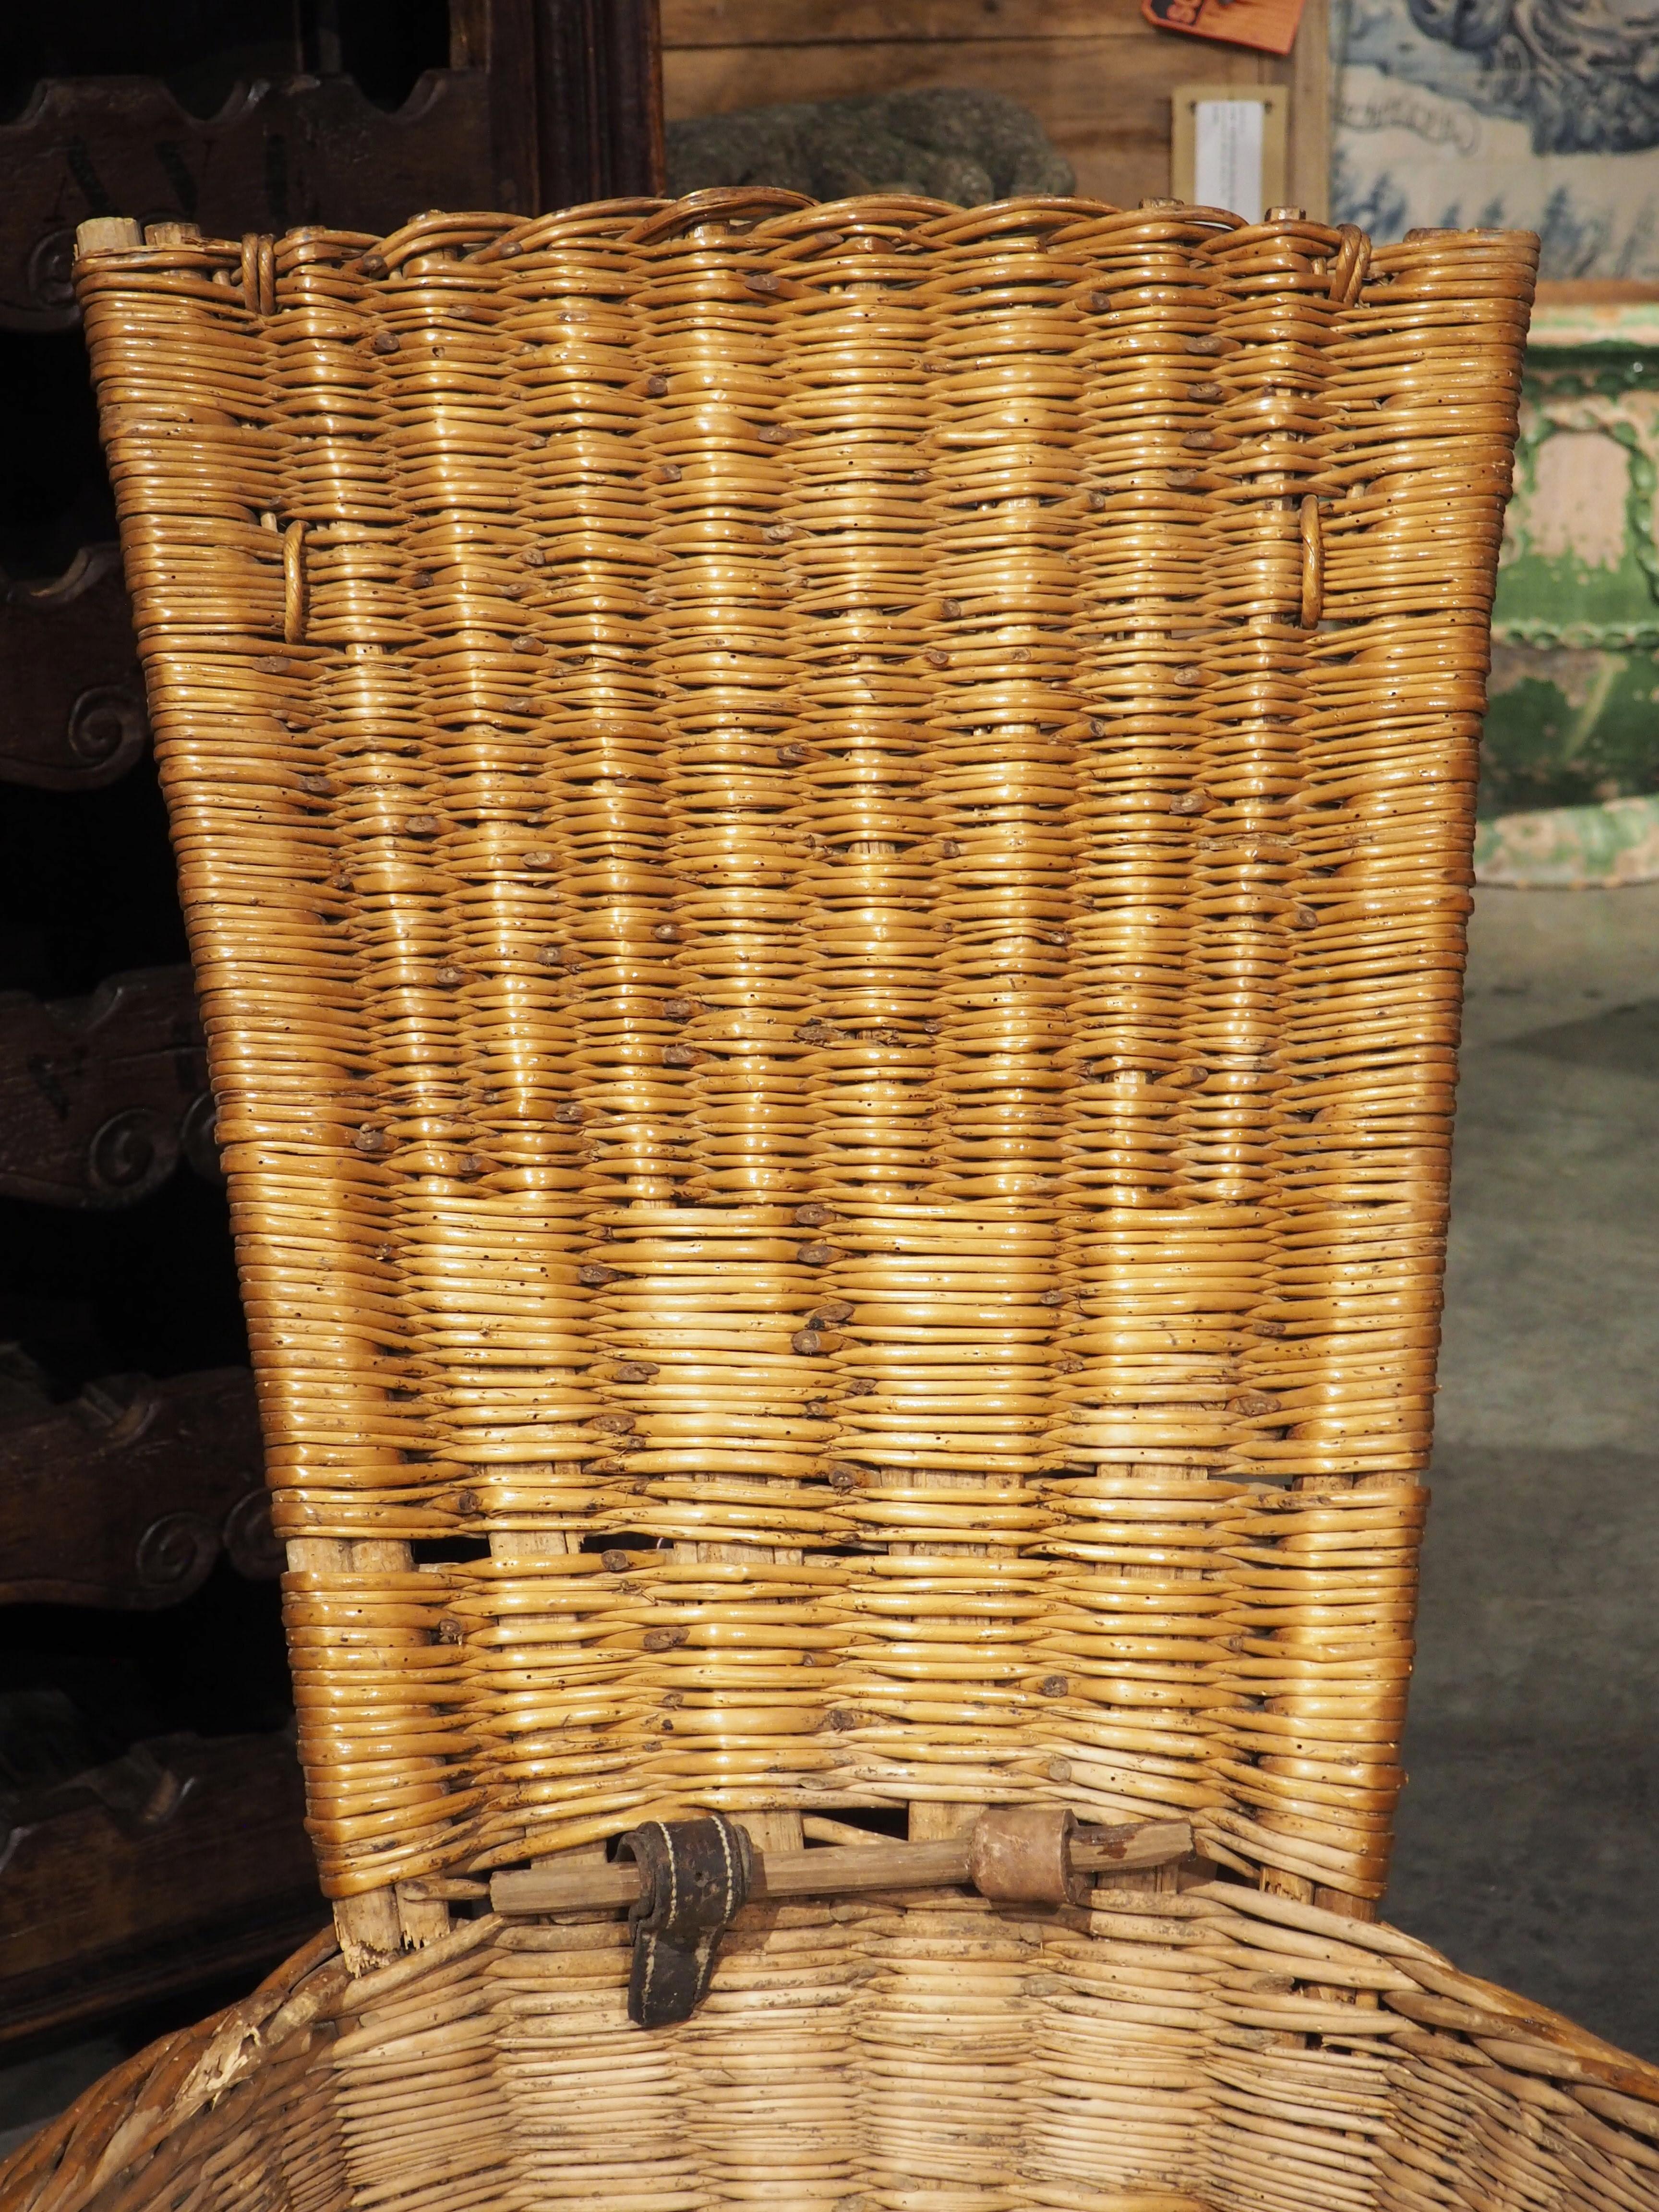 French Handwoven Wine Grape Harvesting Basket from Beaune France, circa 1890